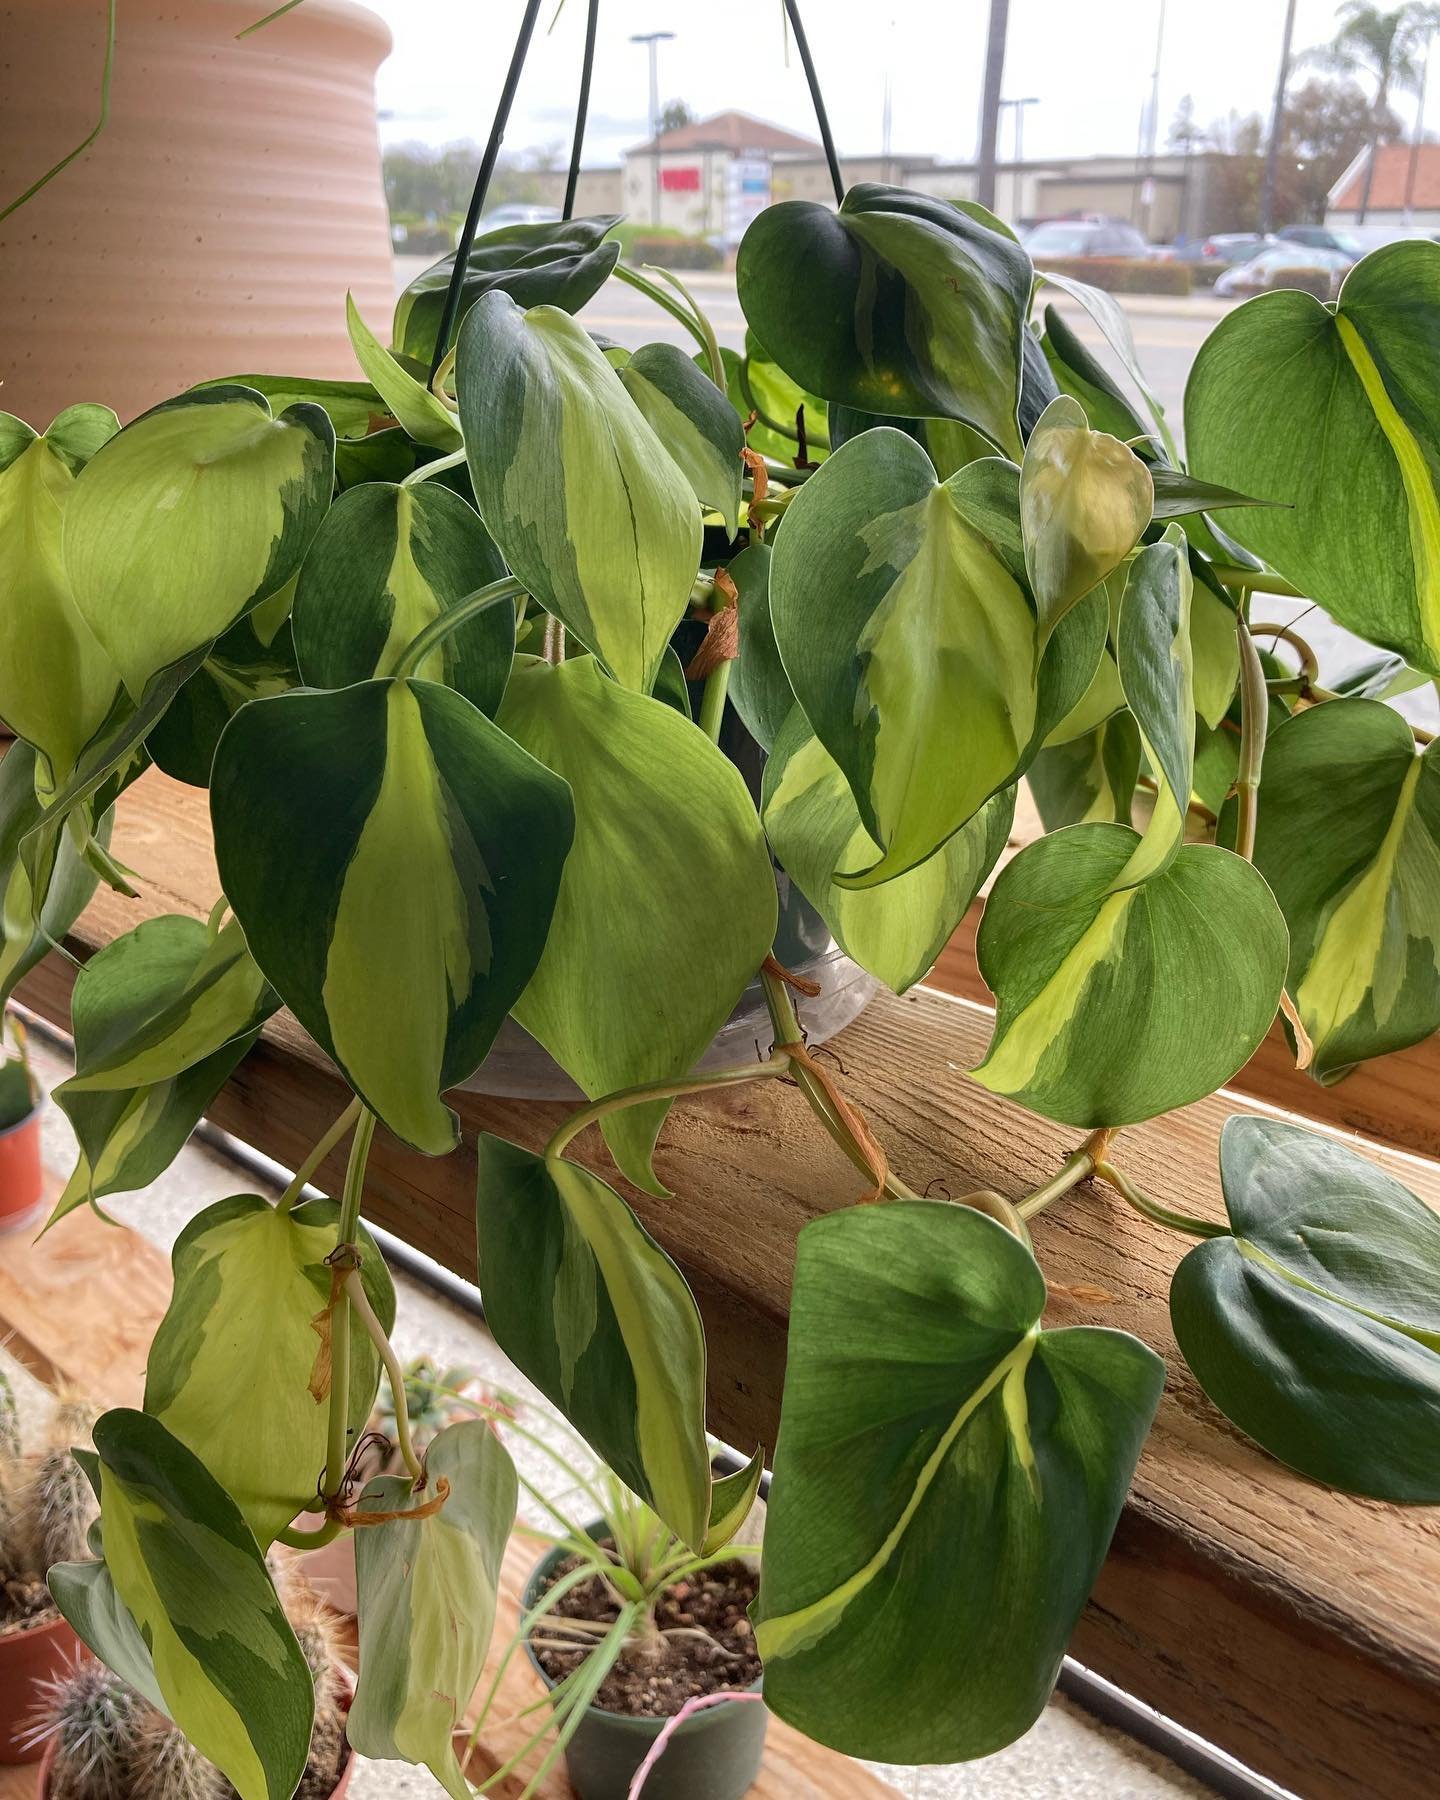 Philodendron Brazil 

This vibrant trailing plant is one of our favorites! Easy to care for and grows very quickly - the perfect choice to give your space that jungle vibe. Provide bright indirect light, water once top half of soil is dry, and easily